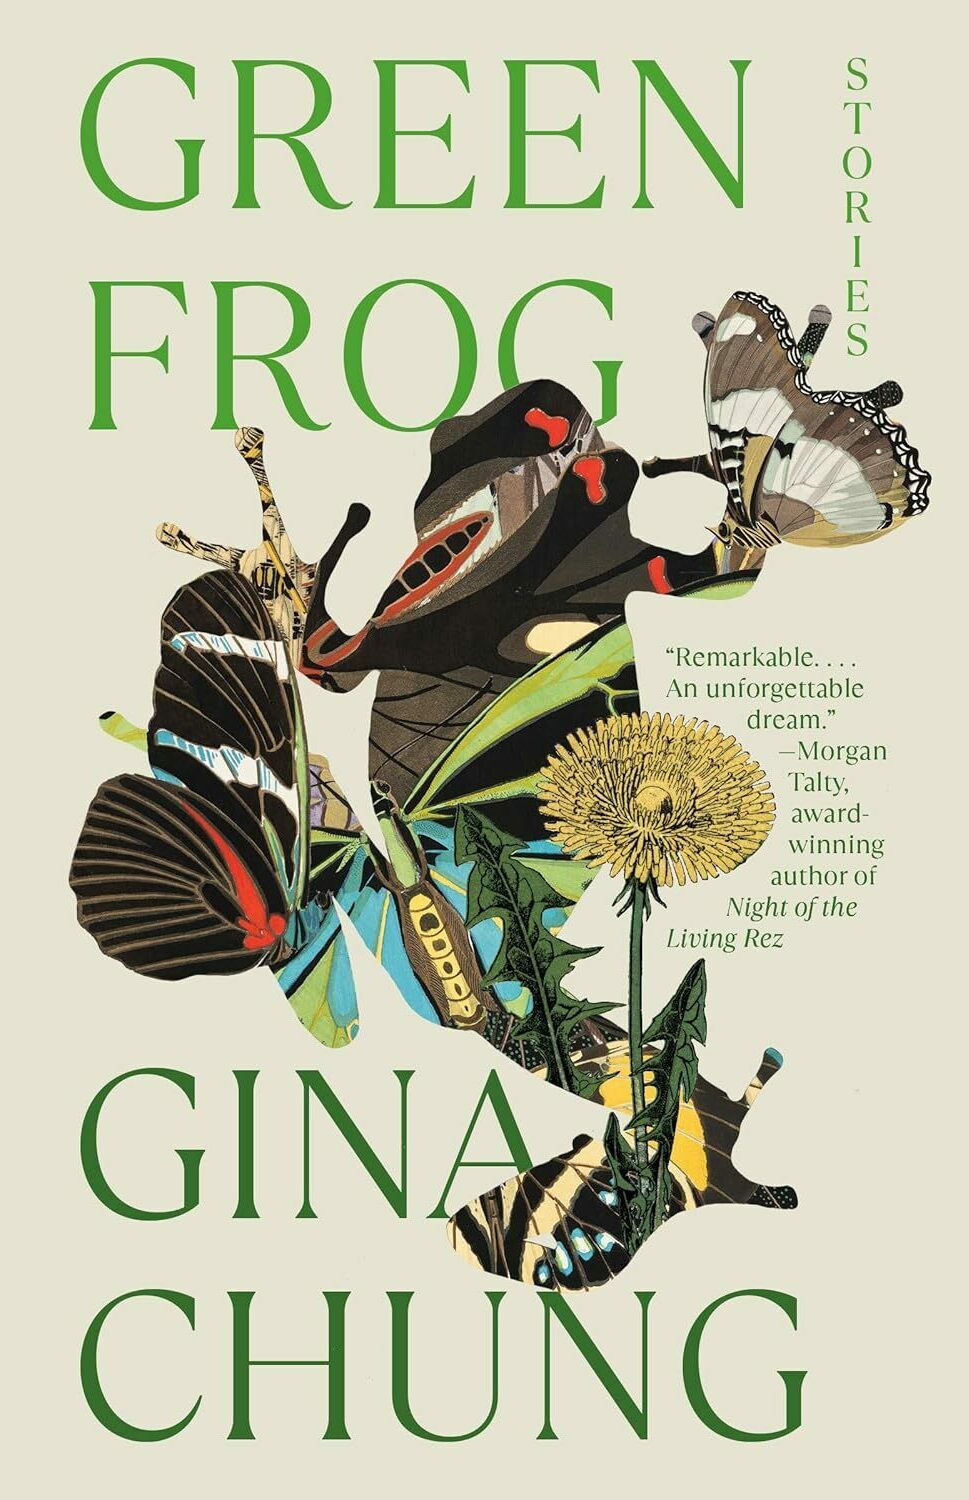 Book cover that includes an abstract, patchwork illustration of a frog and flowers.